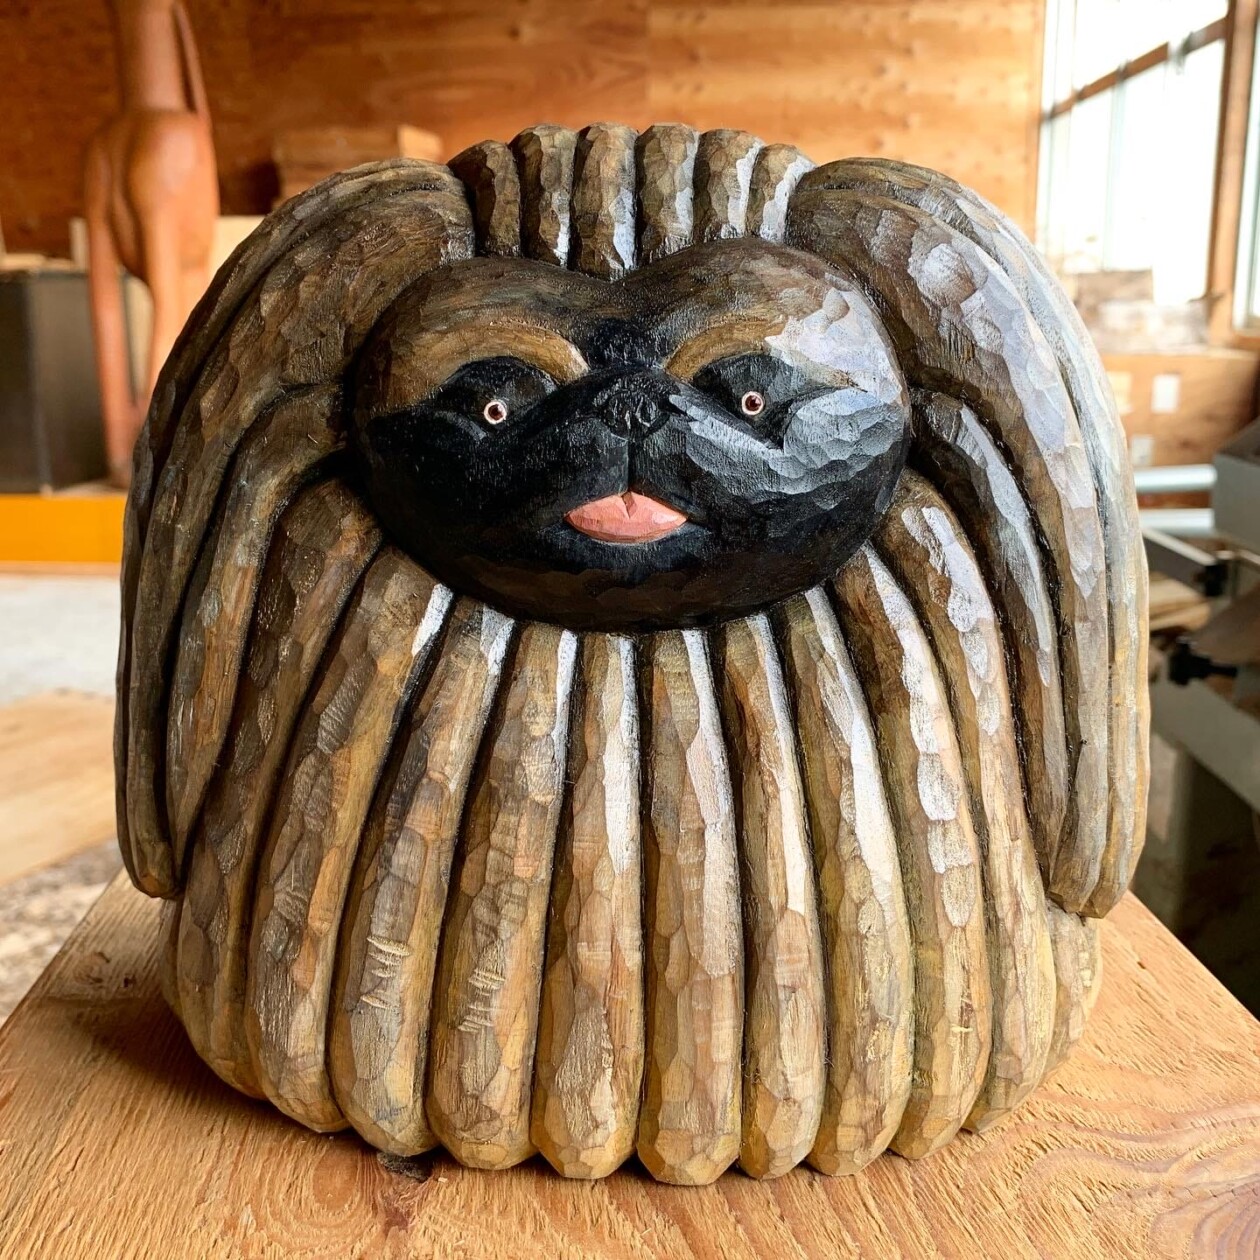 Misato Sano's Wooden Sculptures Bring Canine Companions To Life (7)